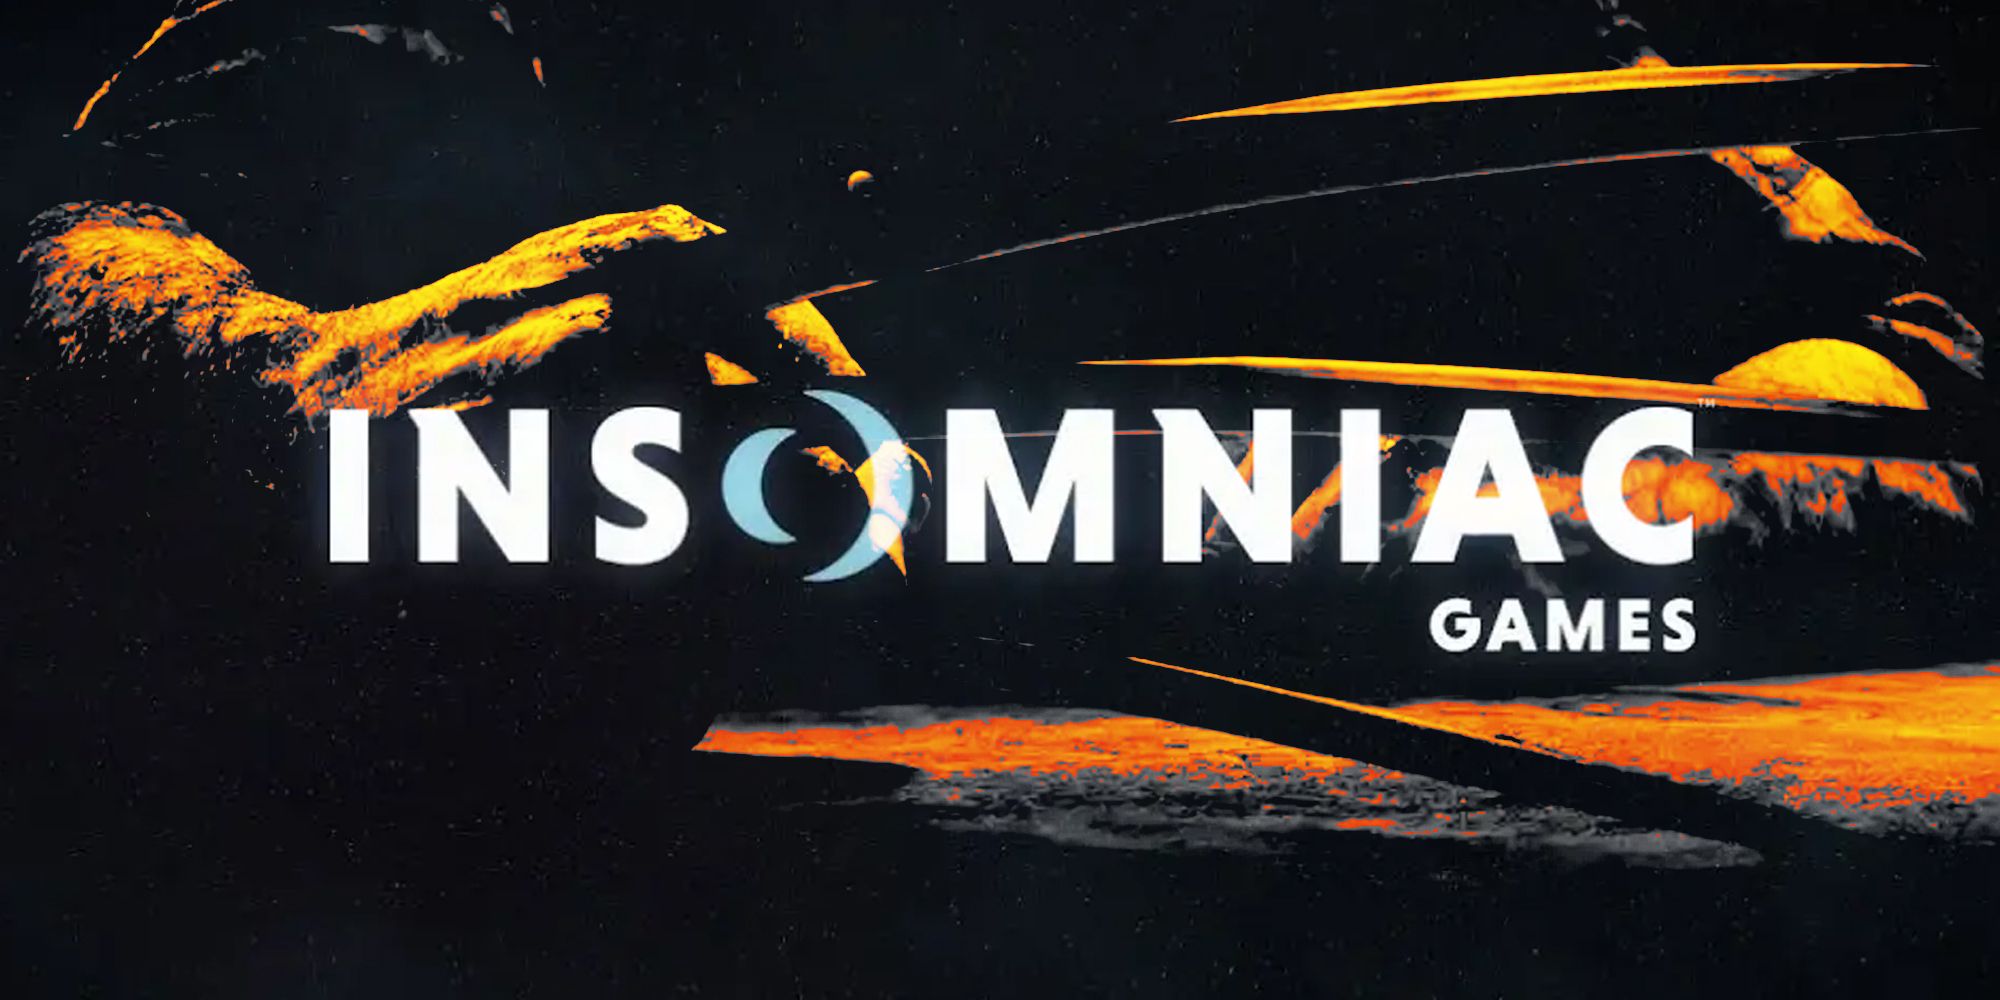 The Insomniac Games logo over a heavily stylised black and orange picture of Wolverine's claws